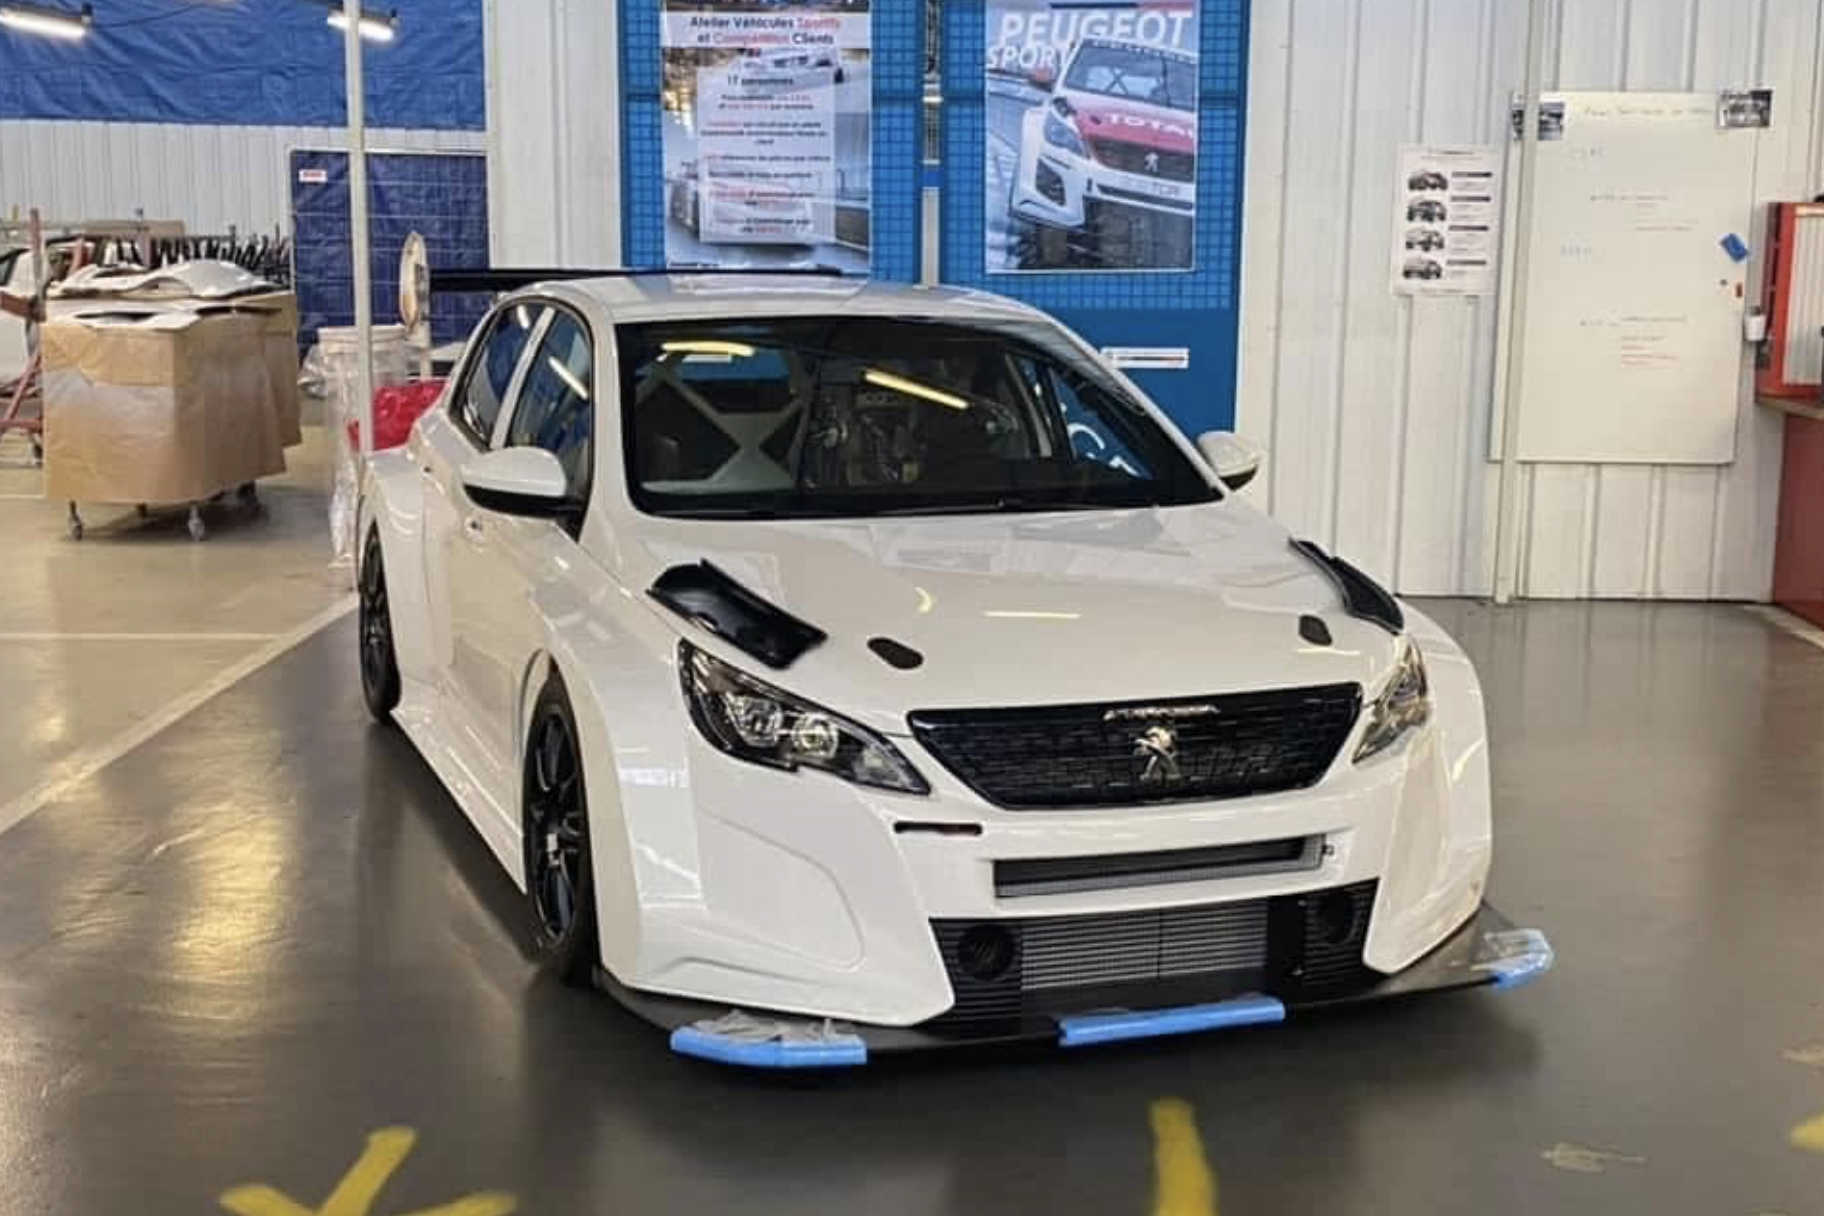 PMO Motorsport to field two Peugeot cars in TCR South America